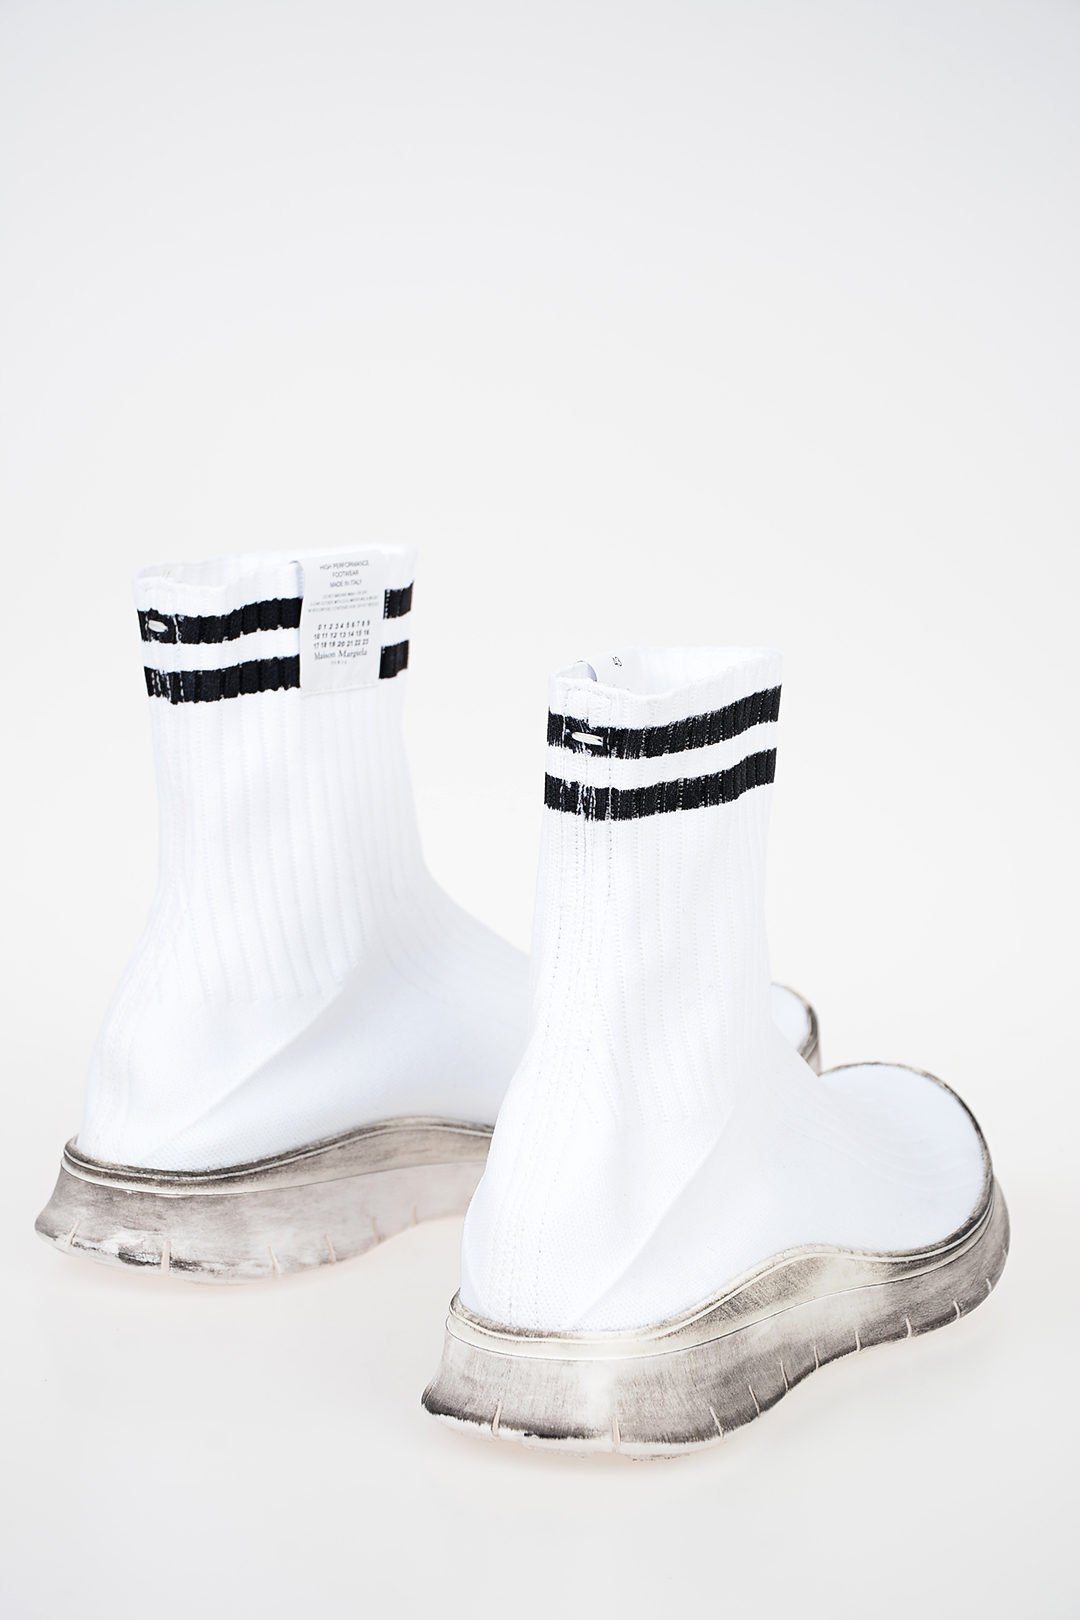 Details about  / MAISON MARGIELA men Sneakers Fabric Socks Sneakers White